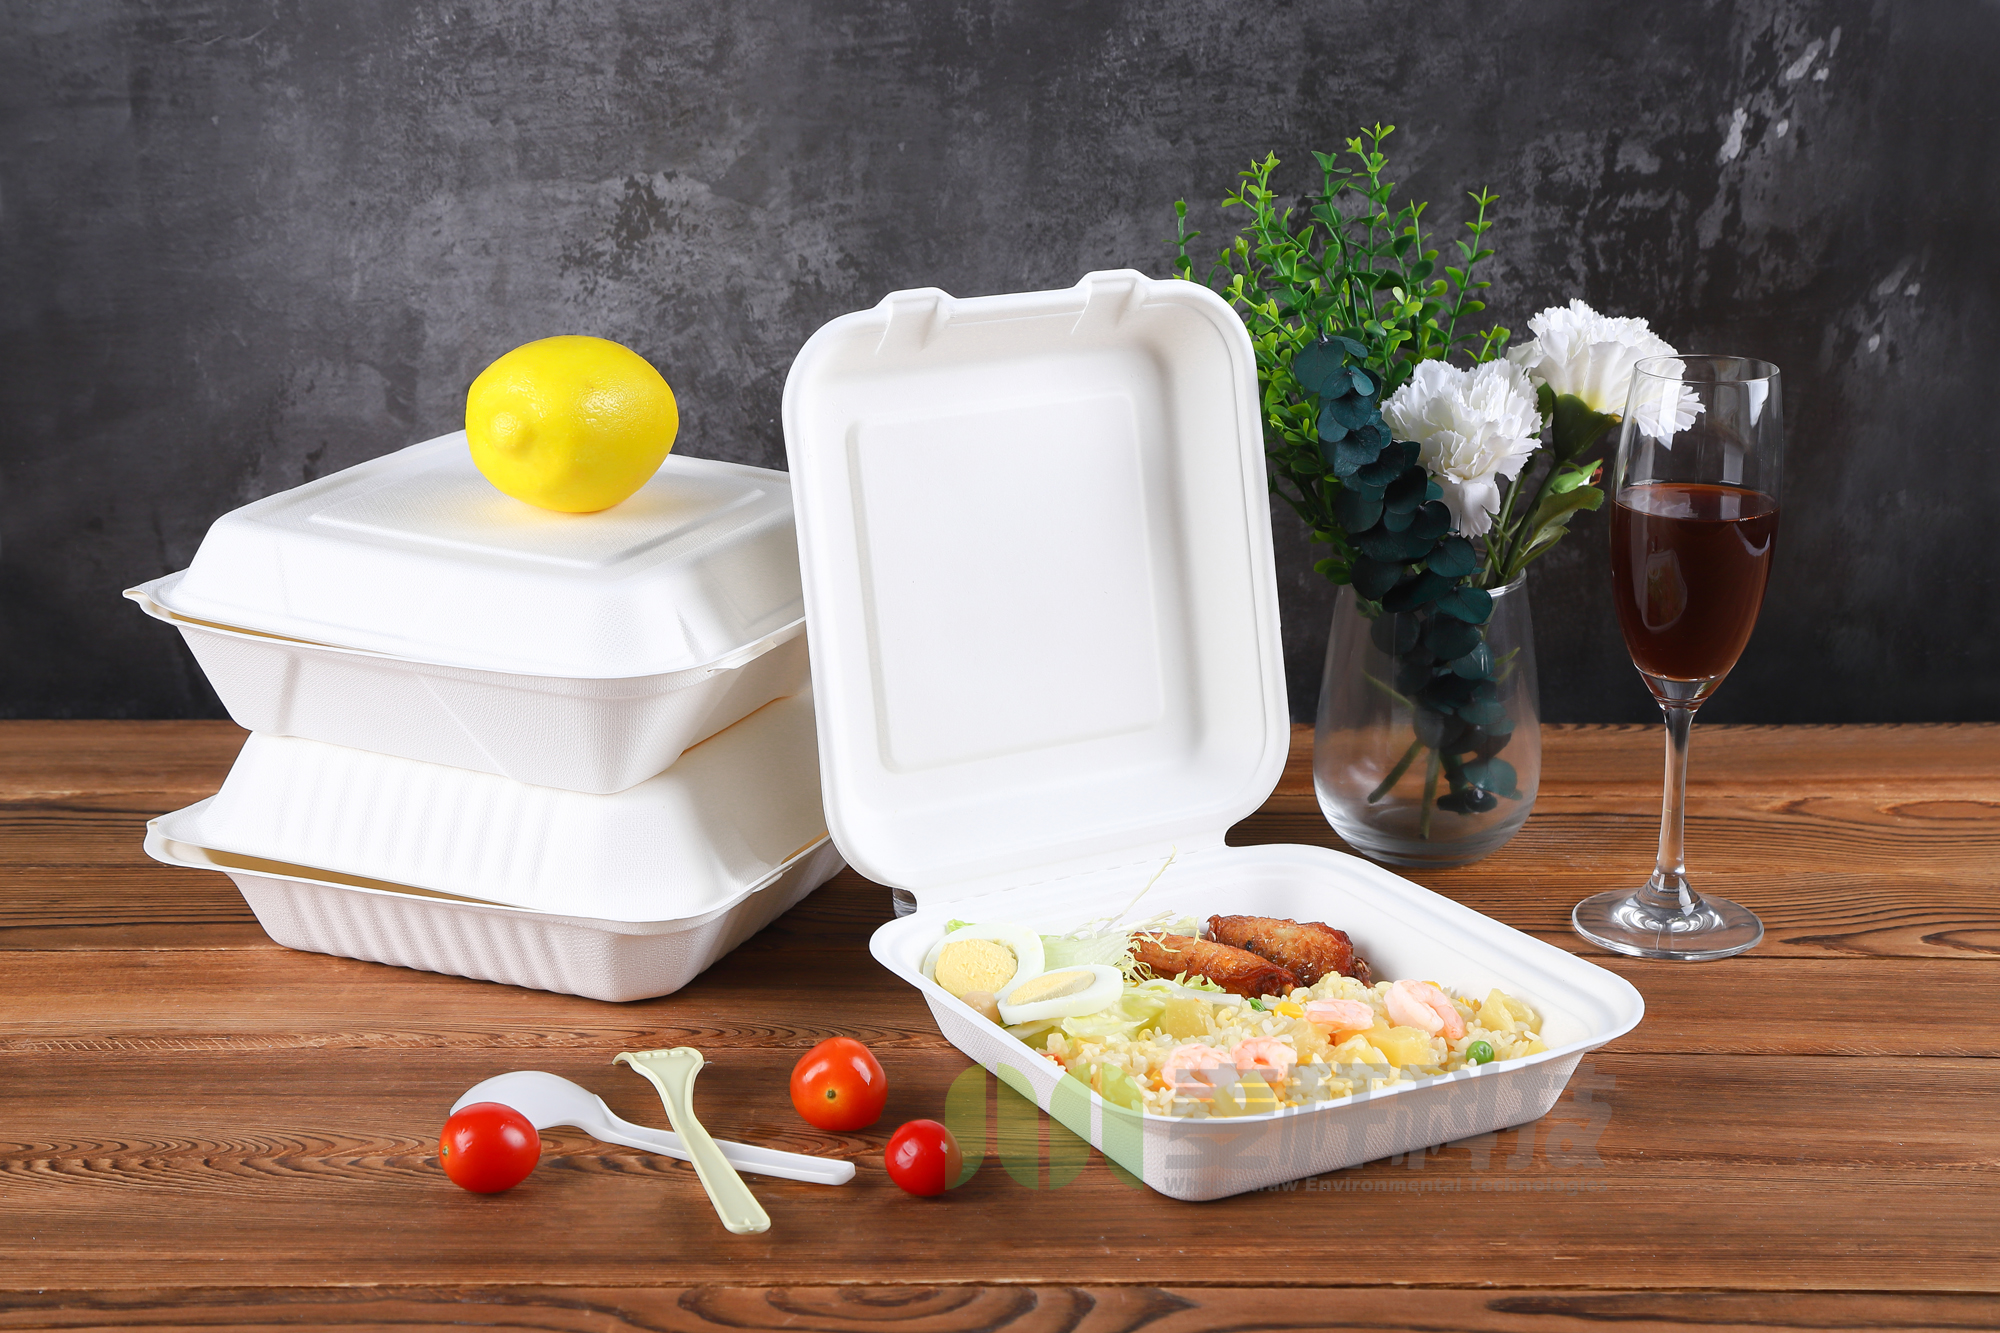 Takeaway box biodegradable disposable food container 600ML lunch box